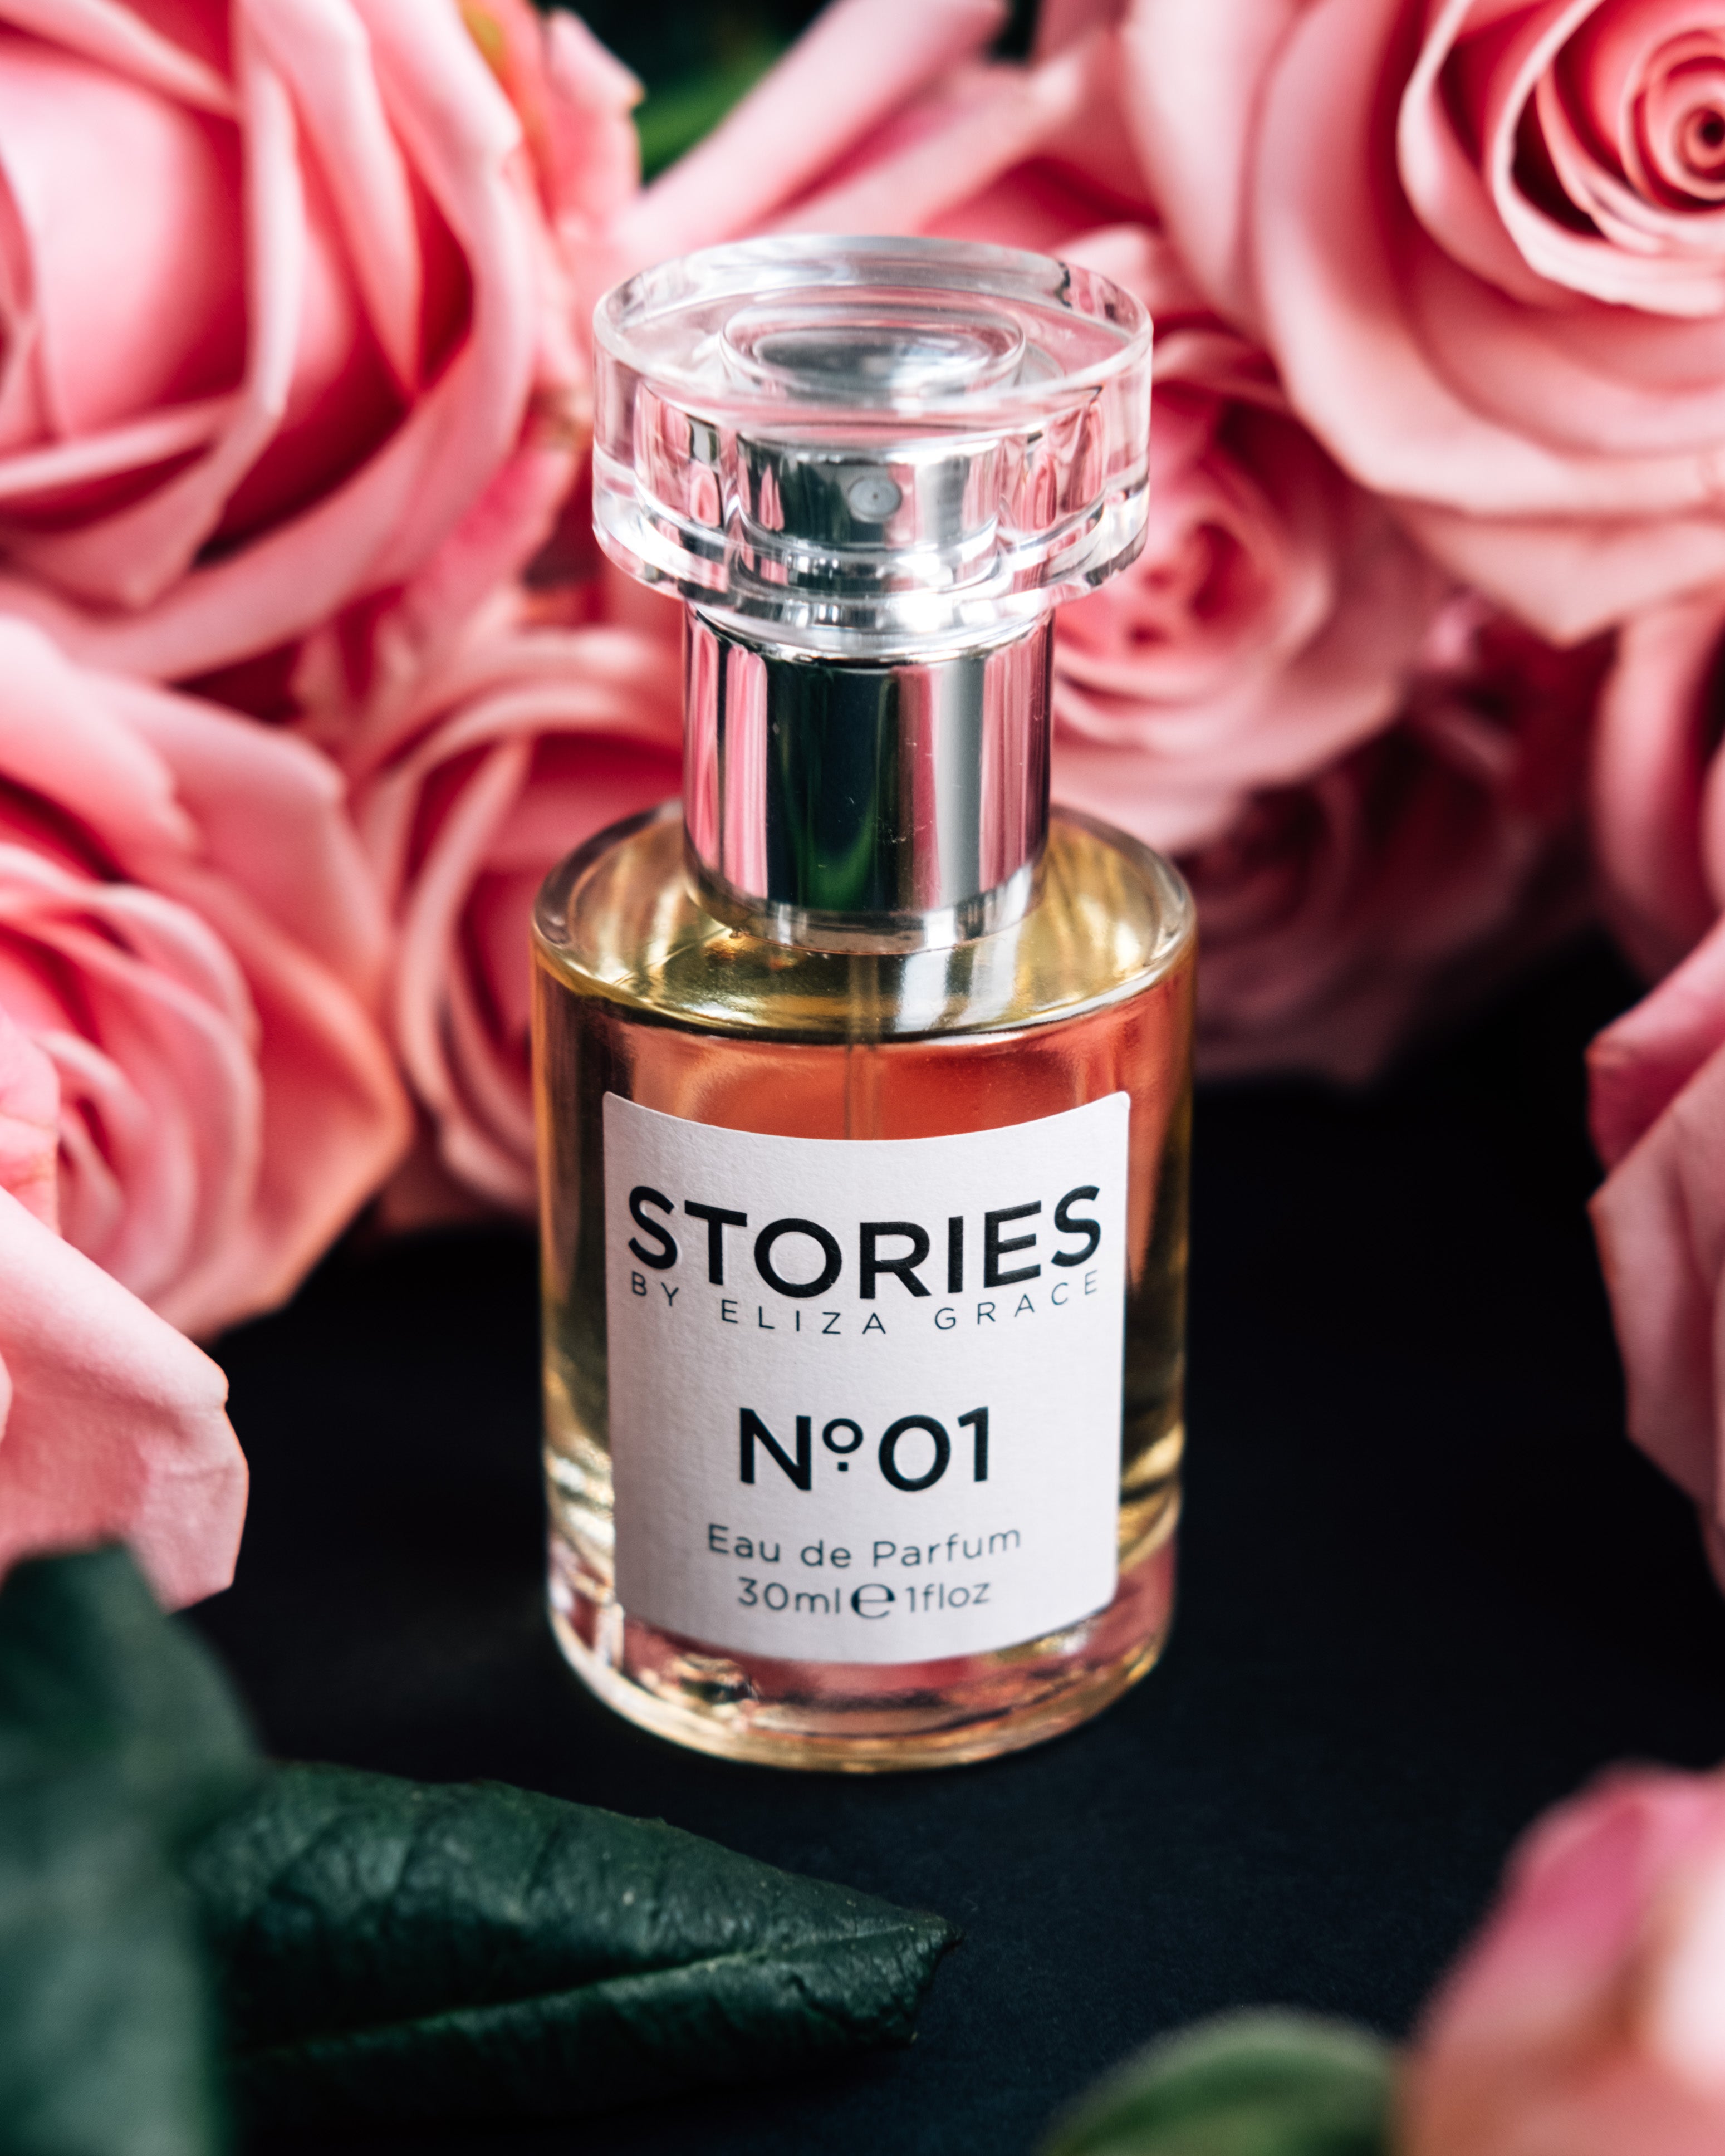 Using Scent to Tell a Story